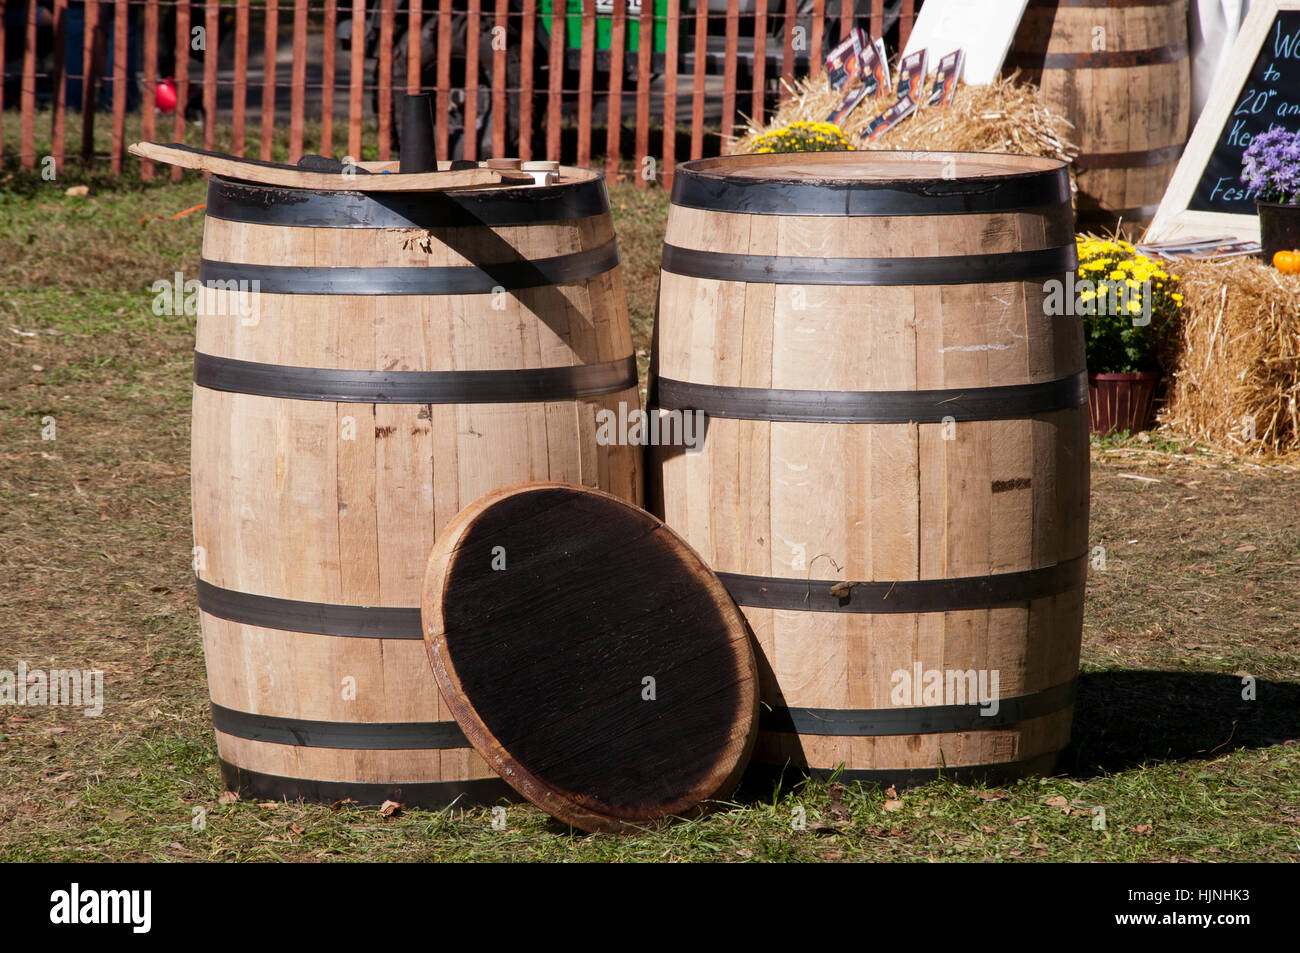 New bourbon barrels being crafted. Stock Photo